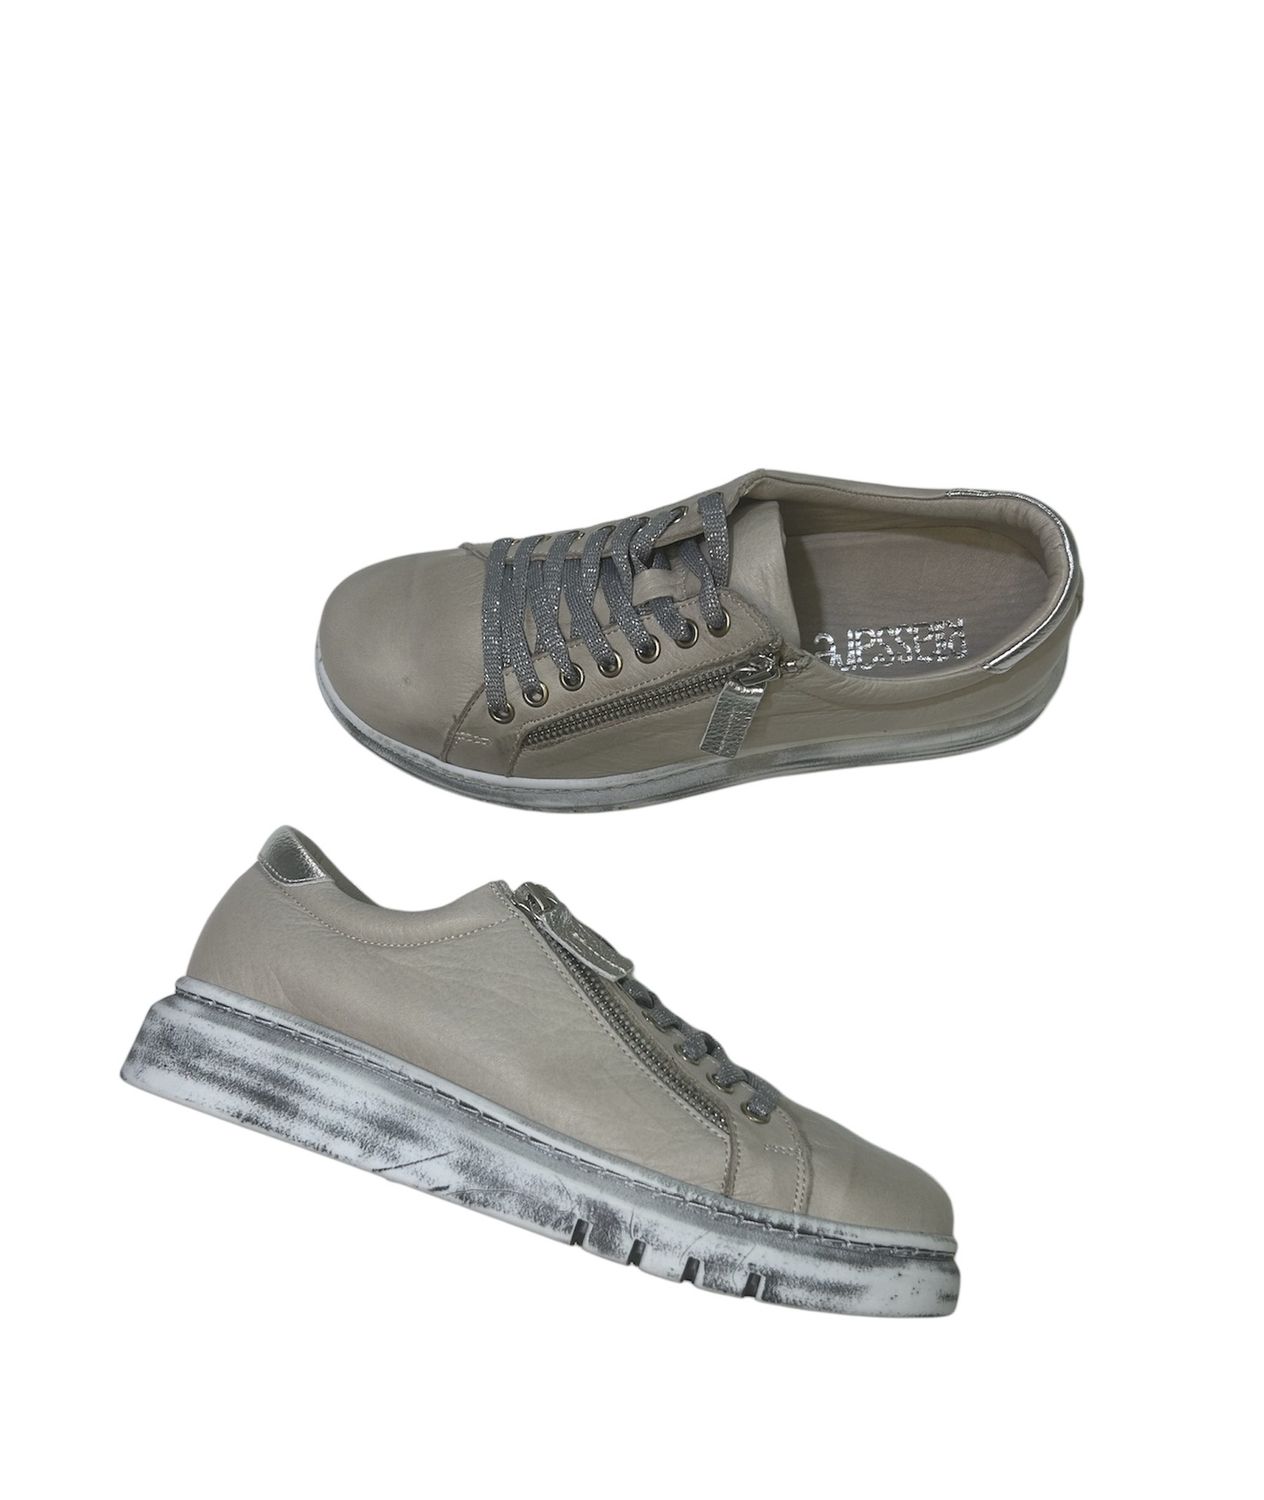 TATTER LEATHER SNEAKER - TAUPE &amp; SILV, Size: 37